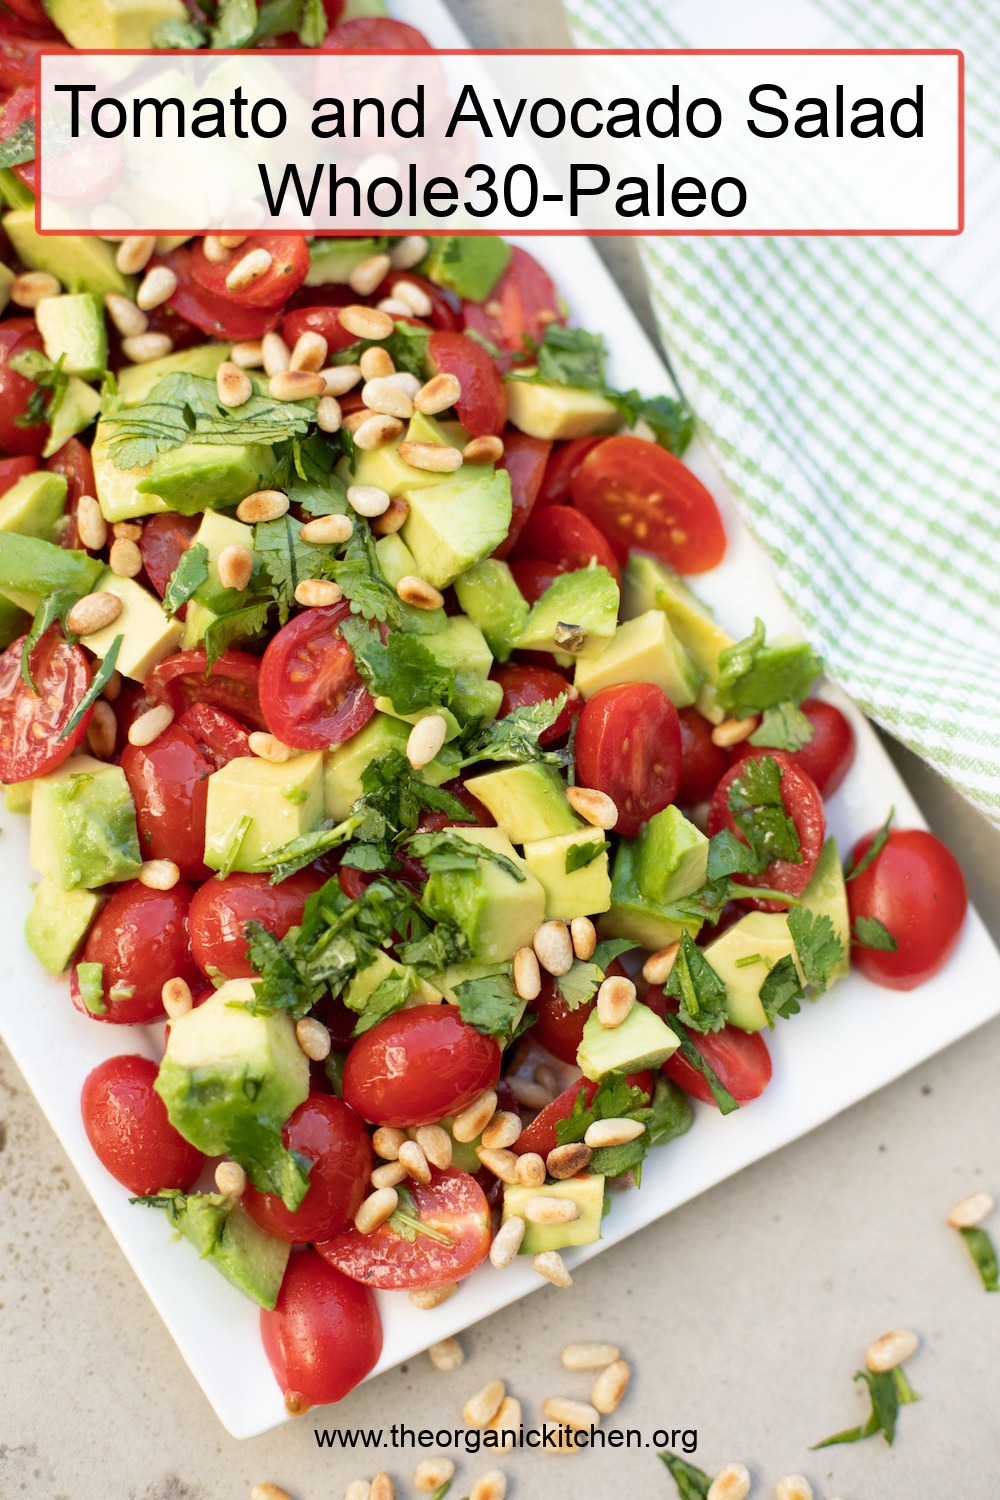 Tomato and Avocado Salad (Whole30) garnished with cilantro and pine nuts on white plate